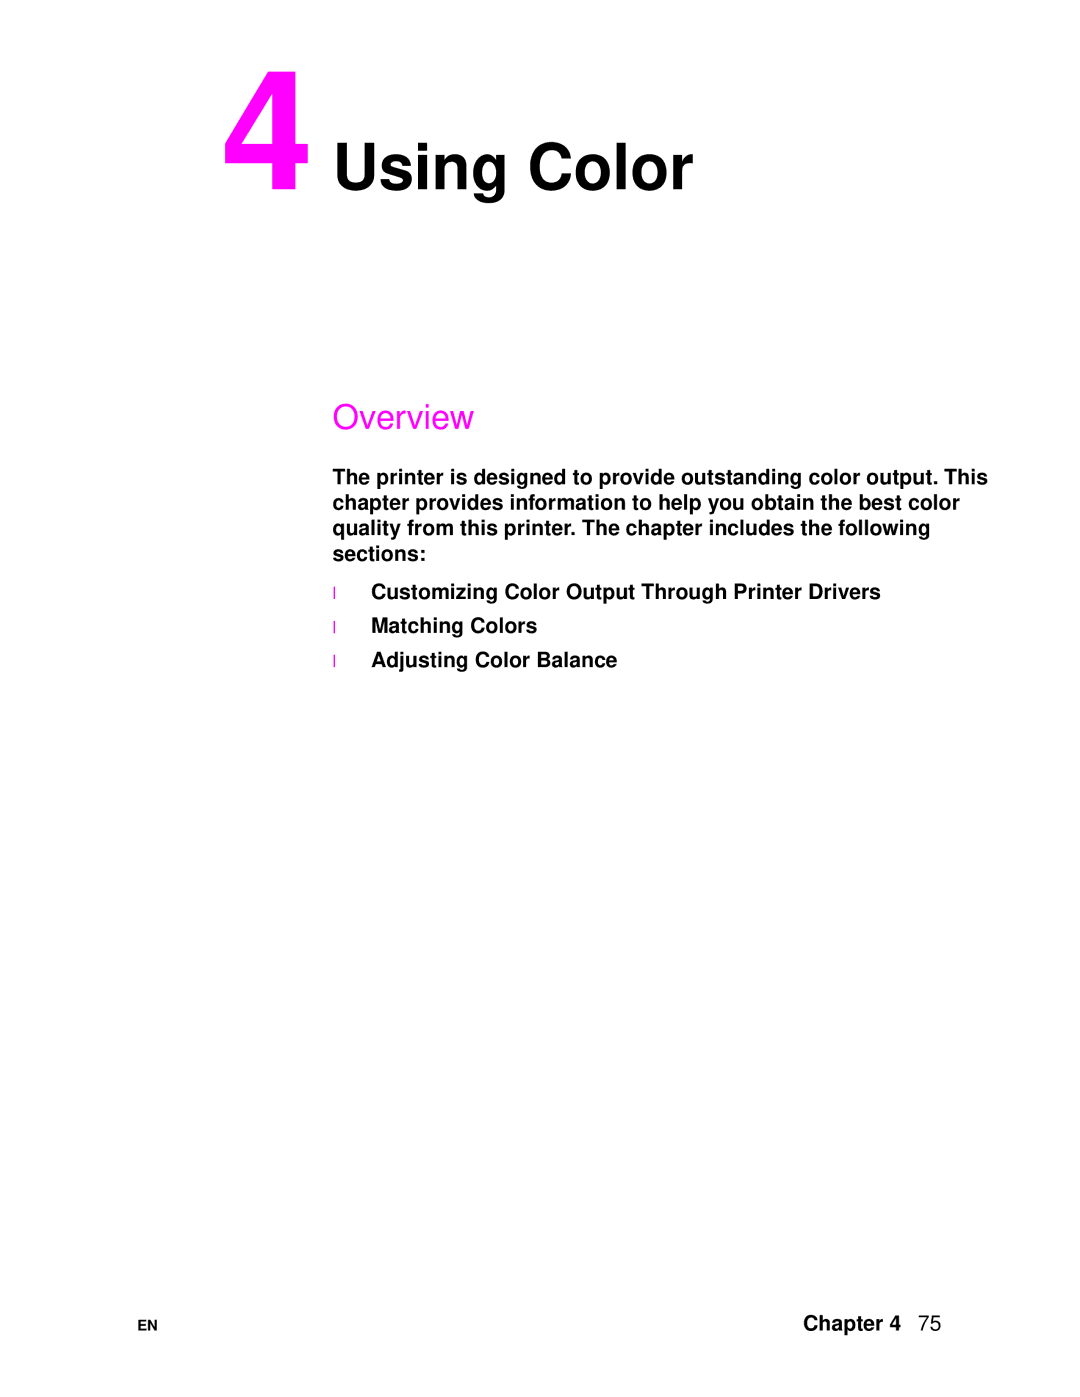 HP 4500DN manual Using Color, Overview 